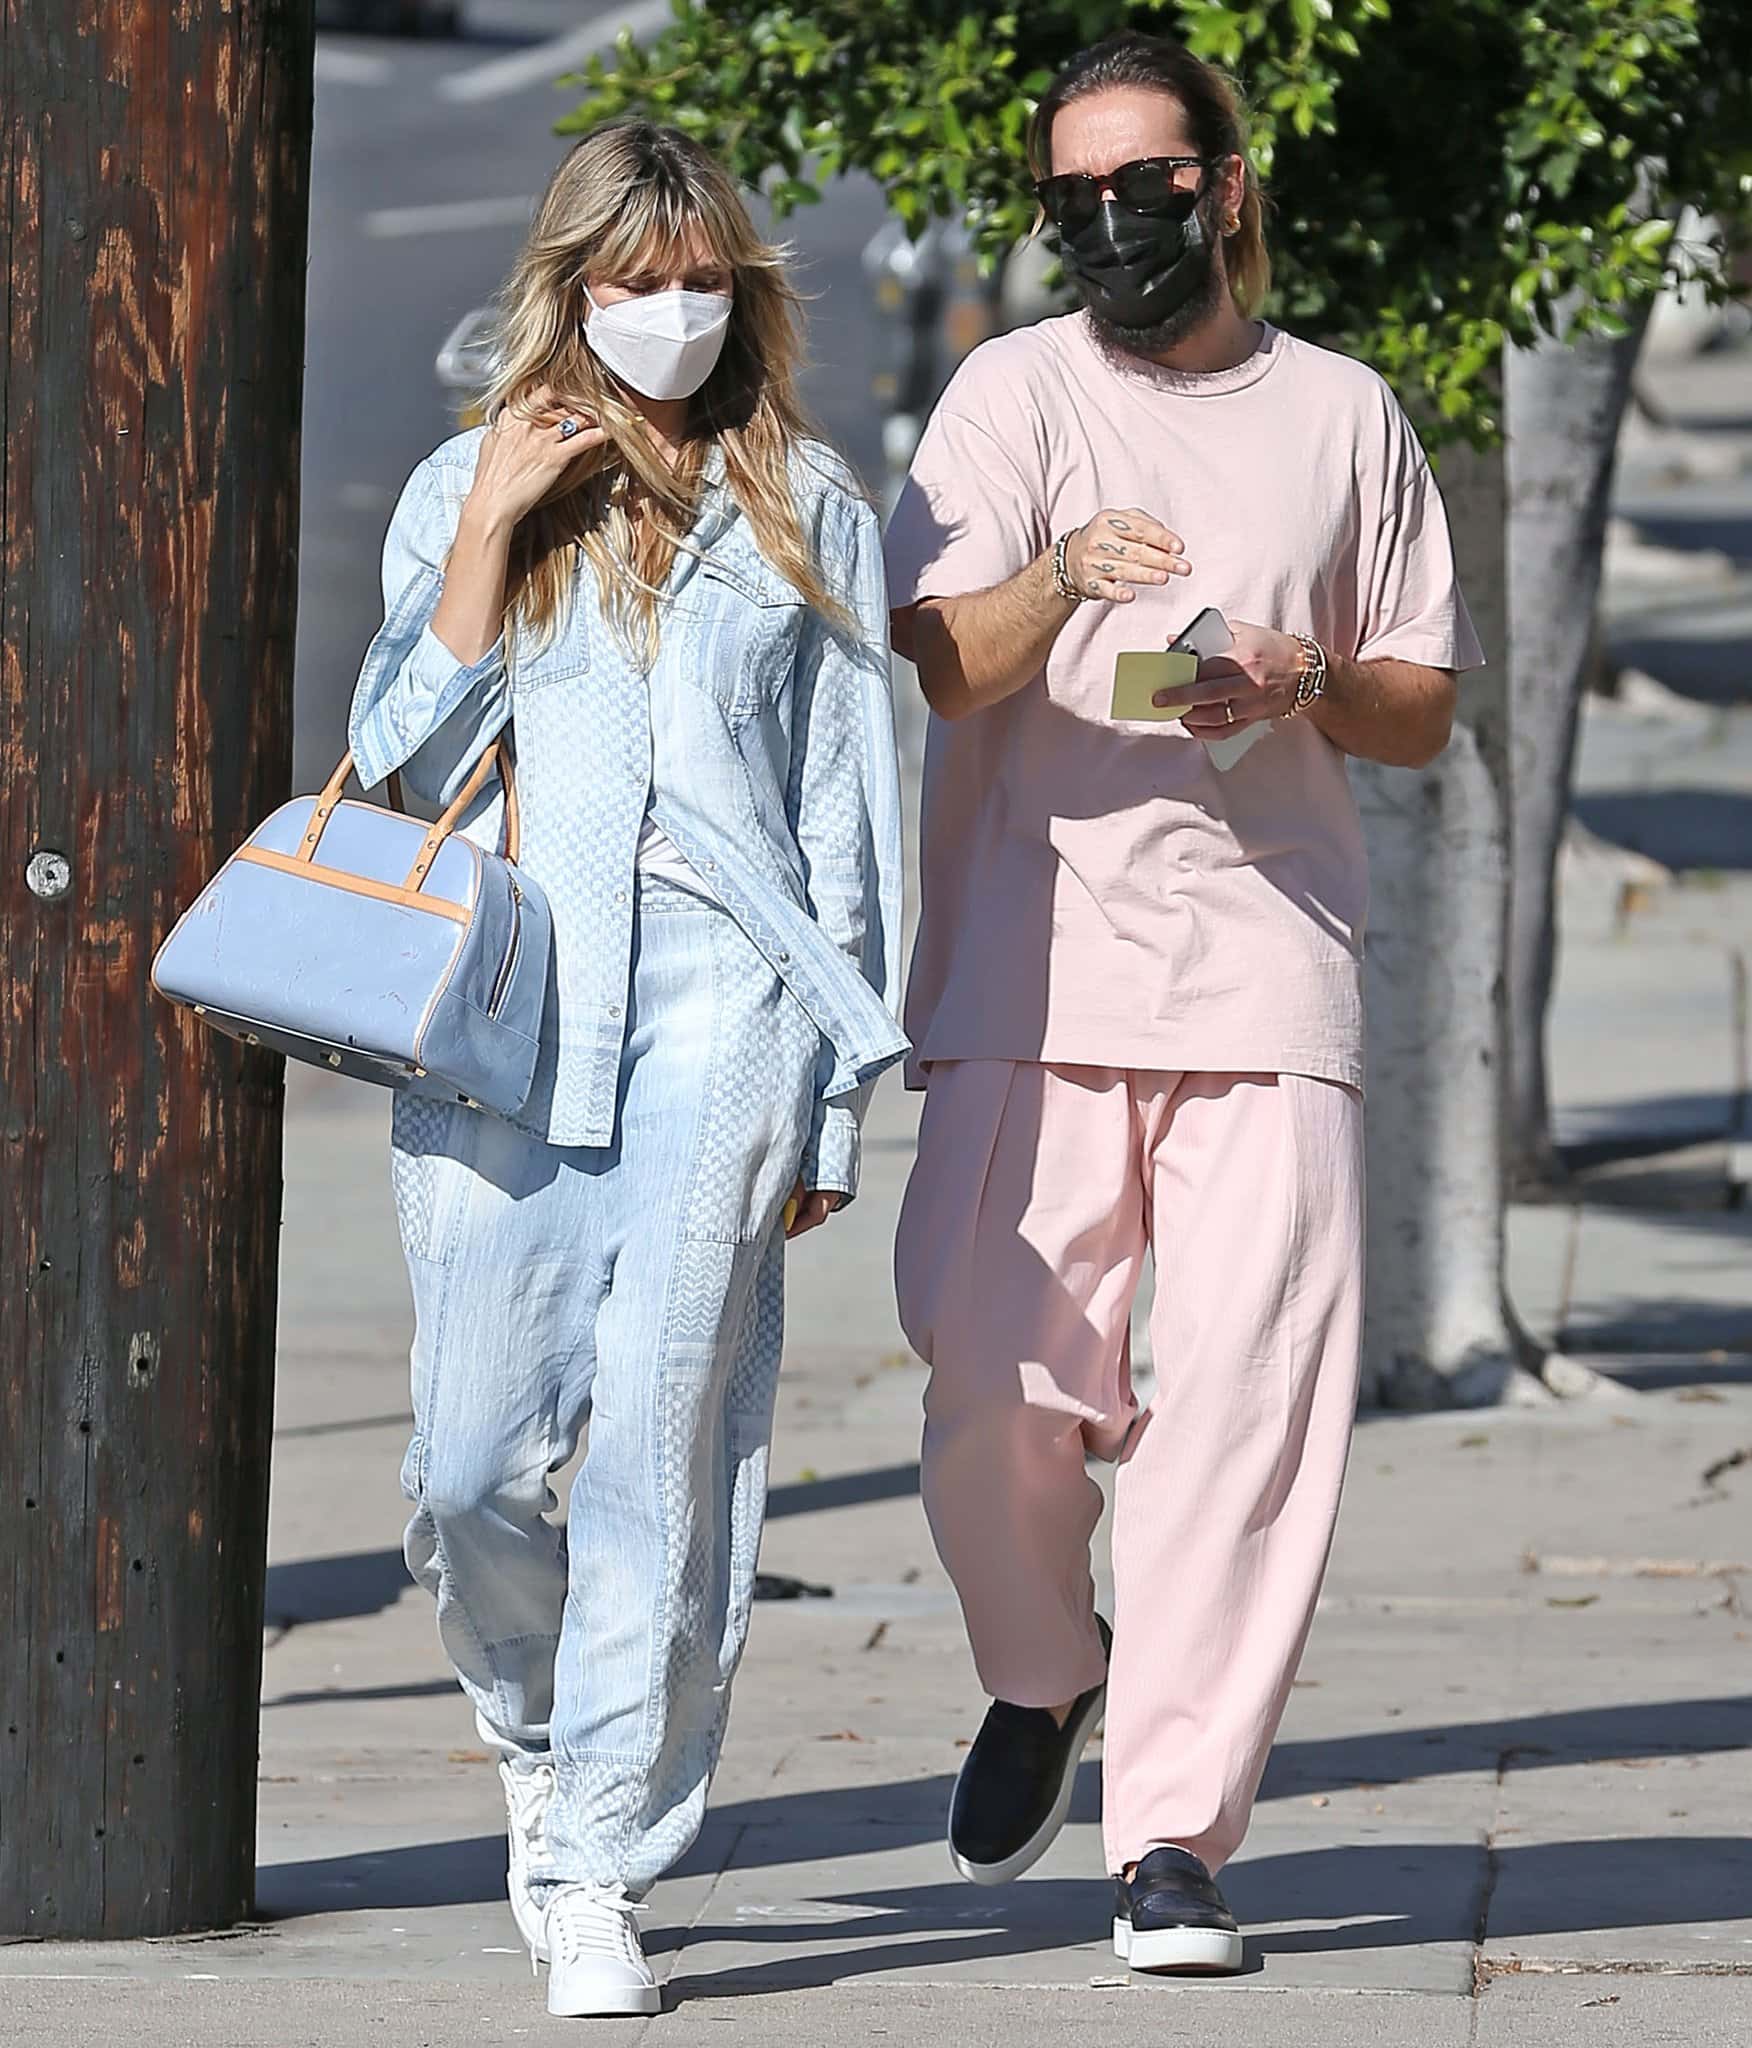 Heidi Klum and Tom Kaulitz shop for furniture in clashing blue and pink outfits on November 24, 2021